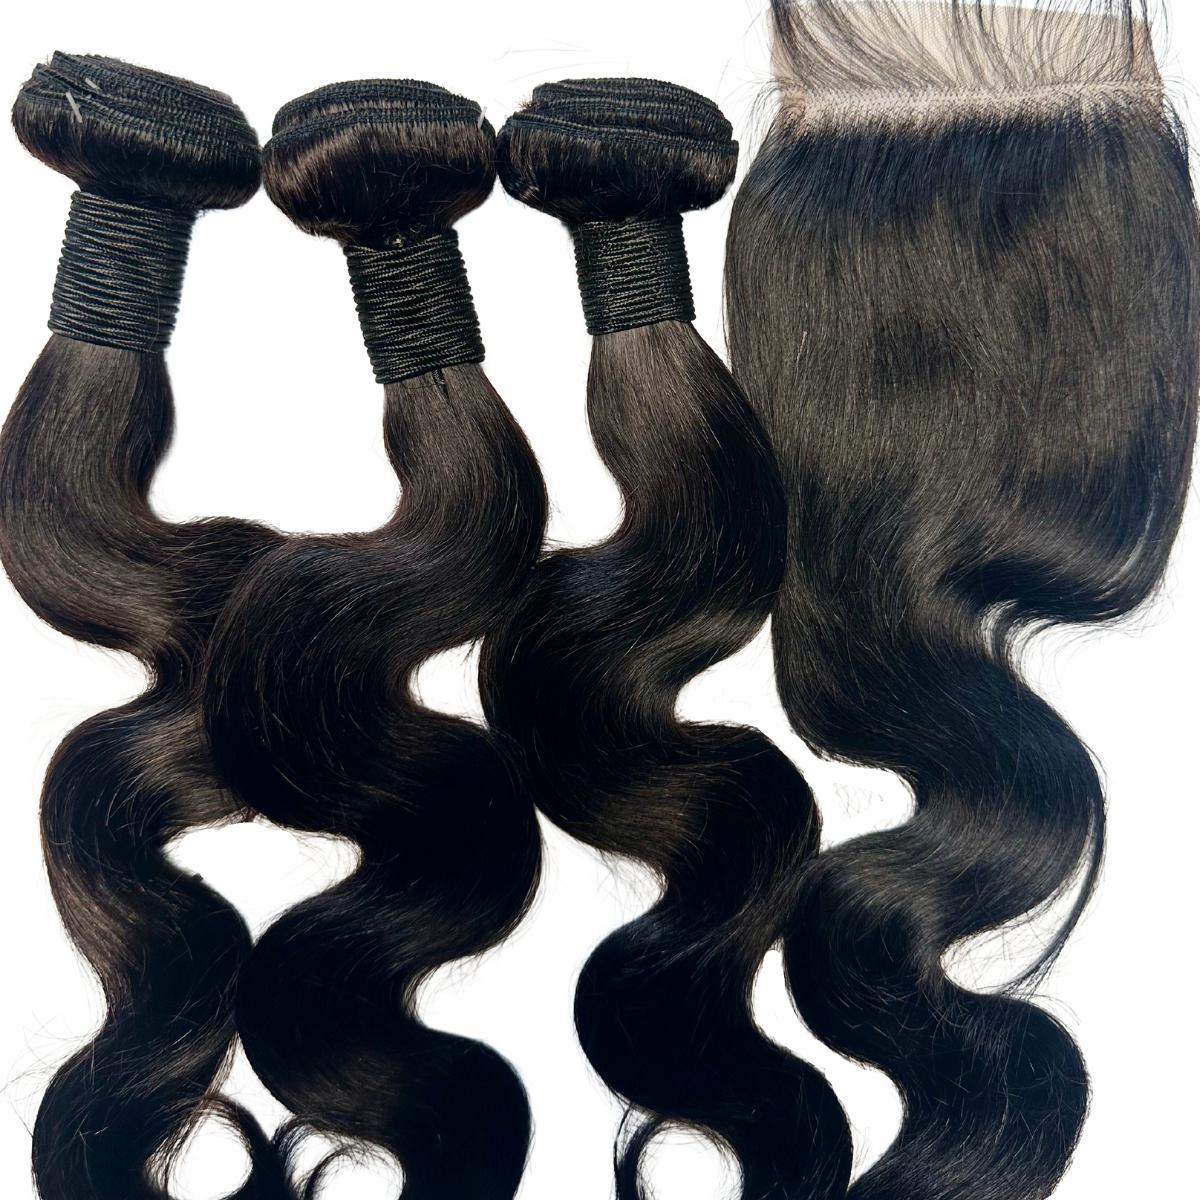 warhouse sale body wave bundle deal with closure